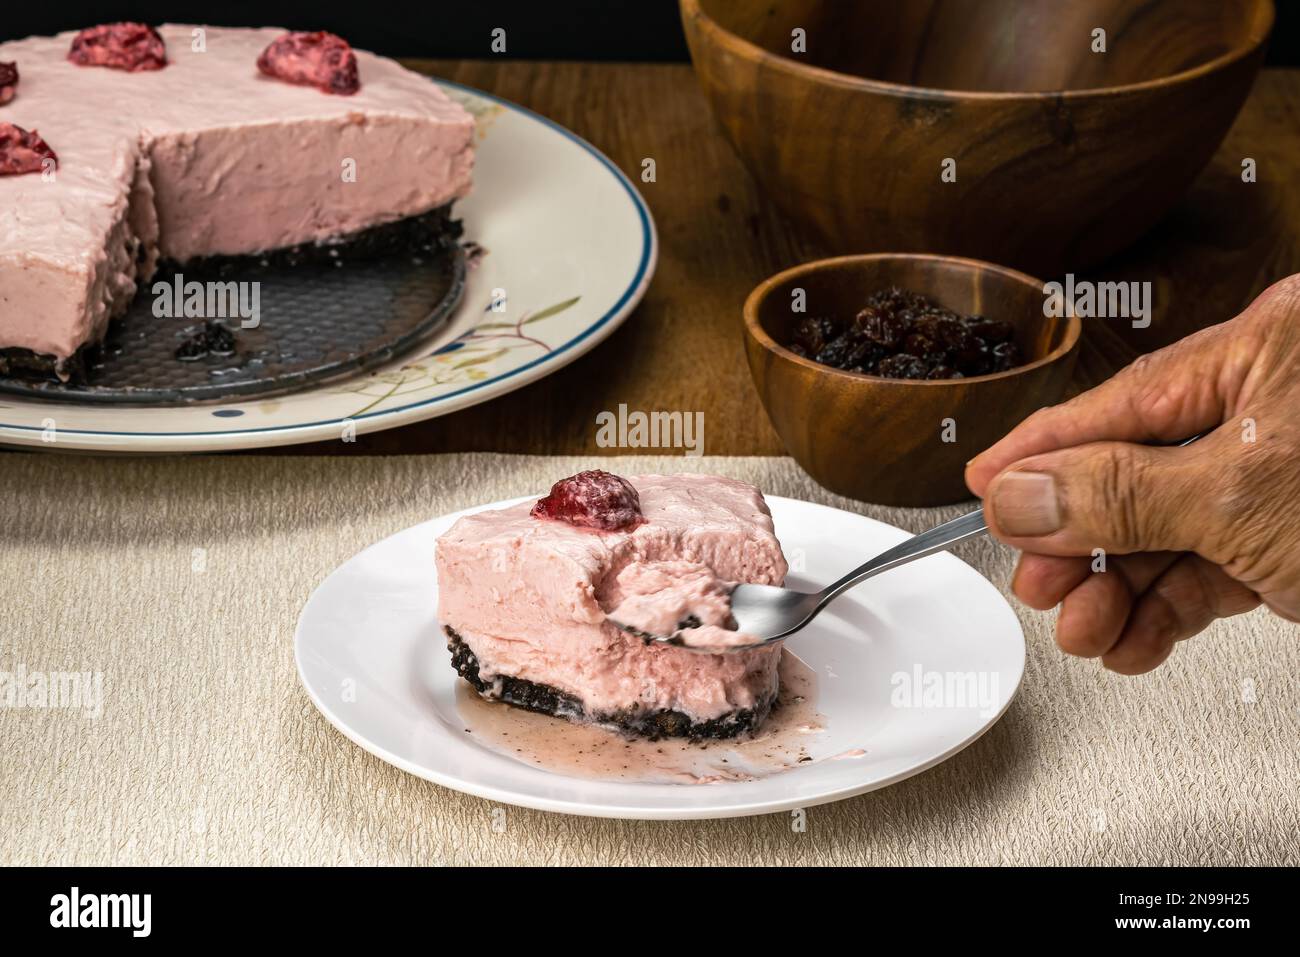 Male senior hand using metal spoon taking a bite from delicious homemade frozen strawberry cheesecake in white ceramic dish on table mat with dried Stock Photo